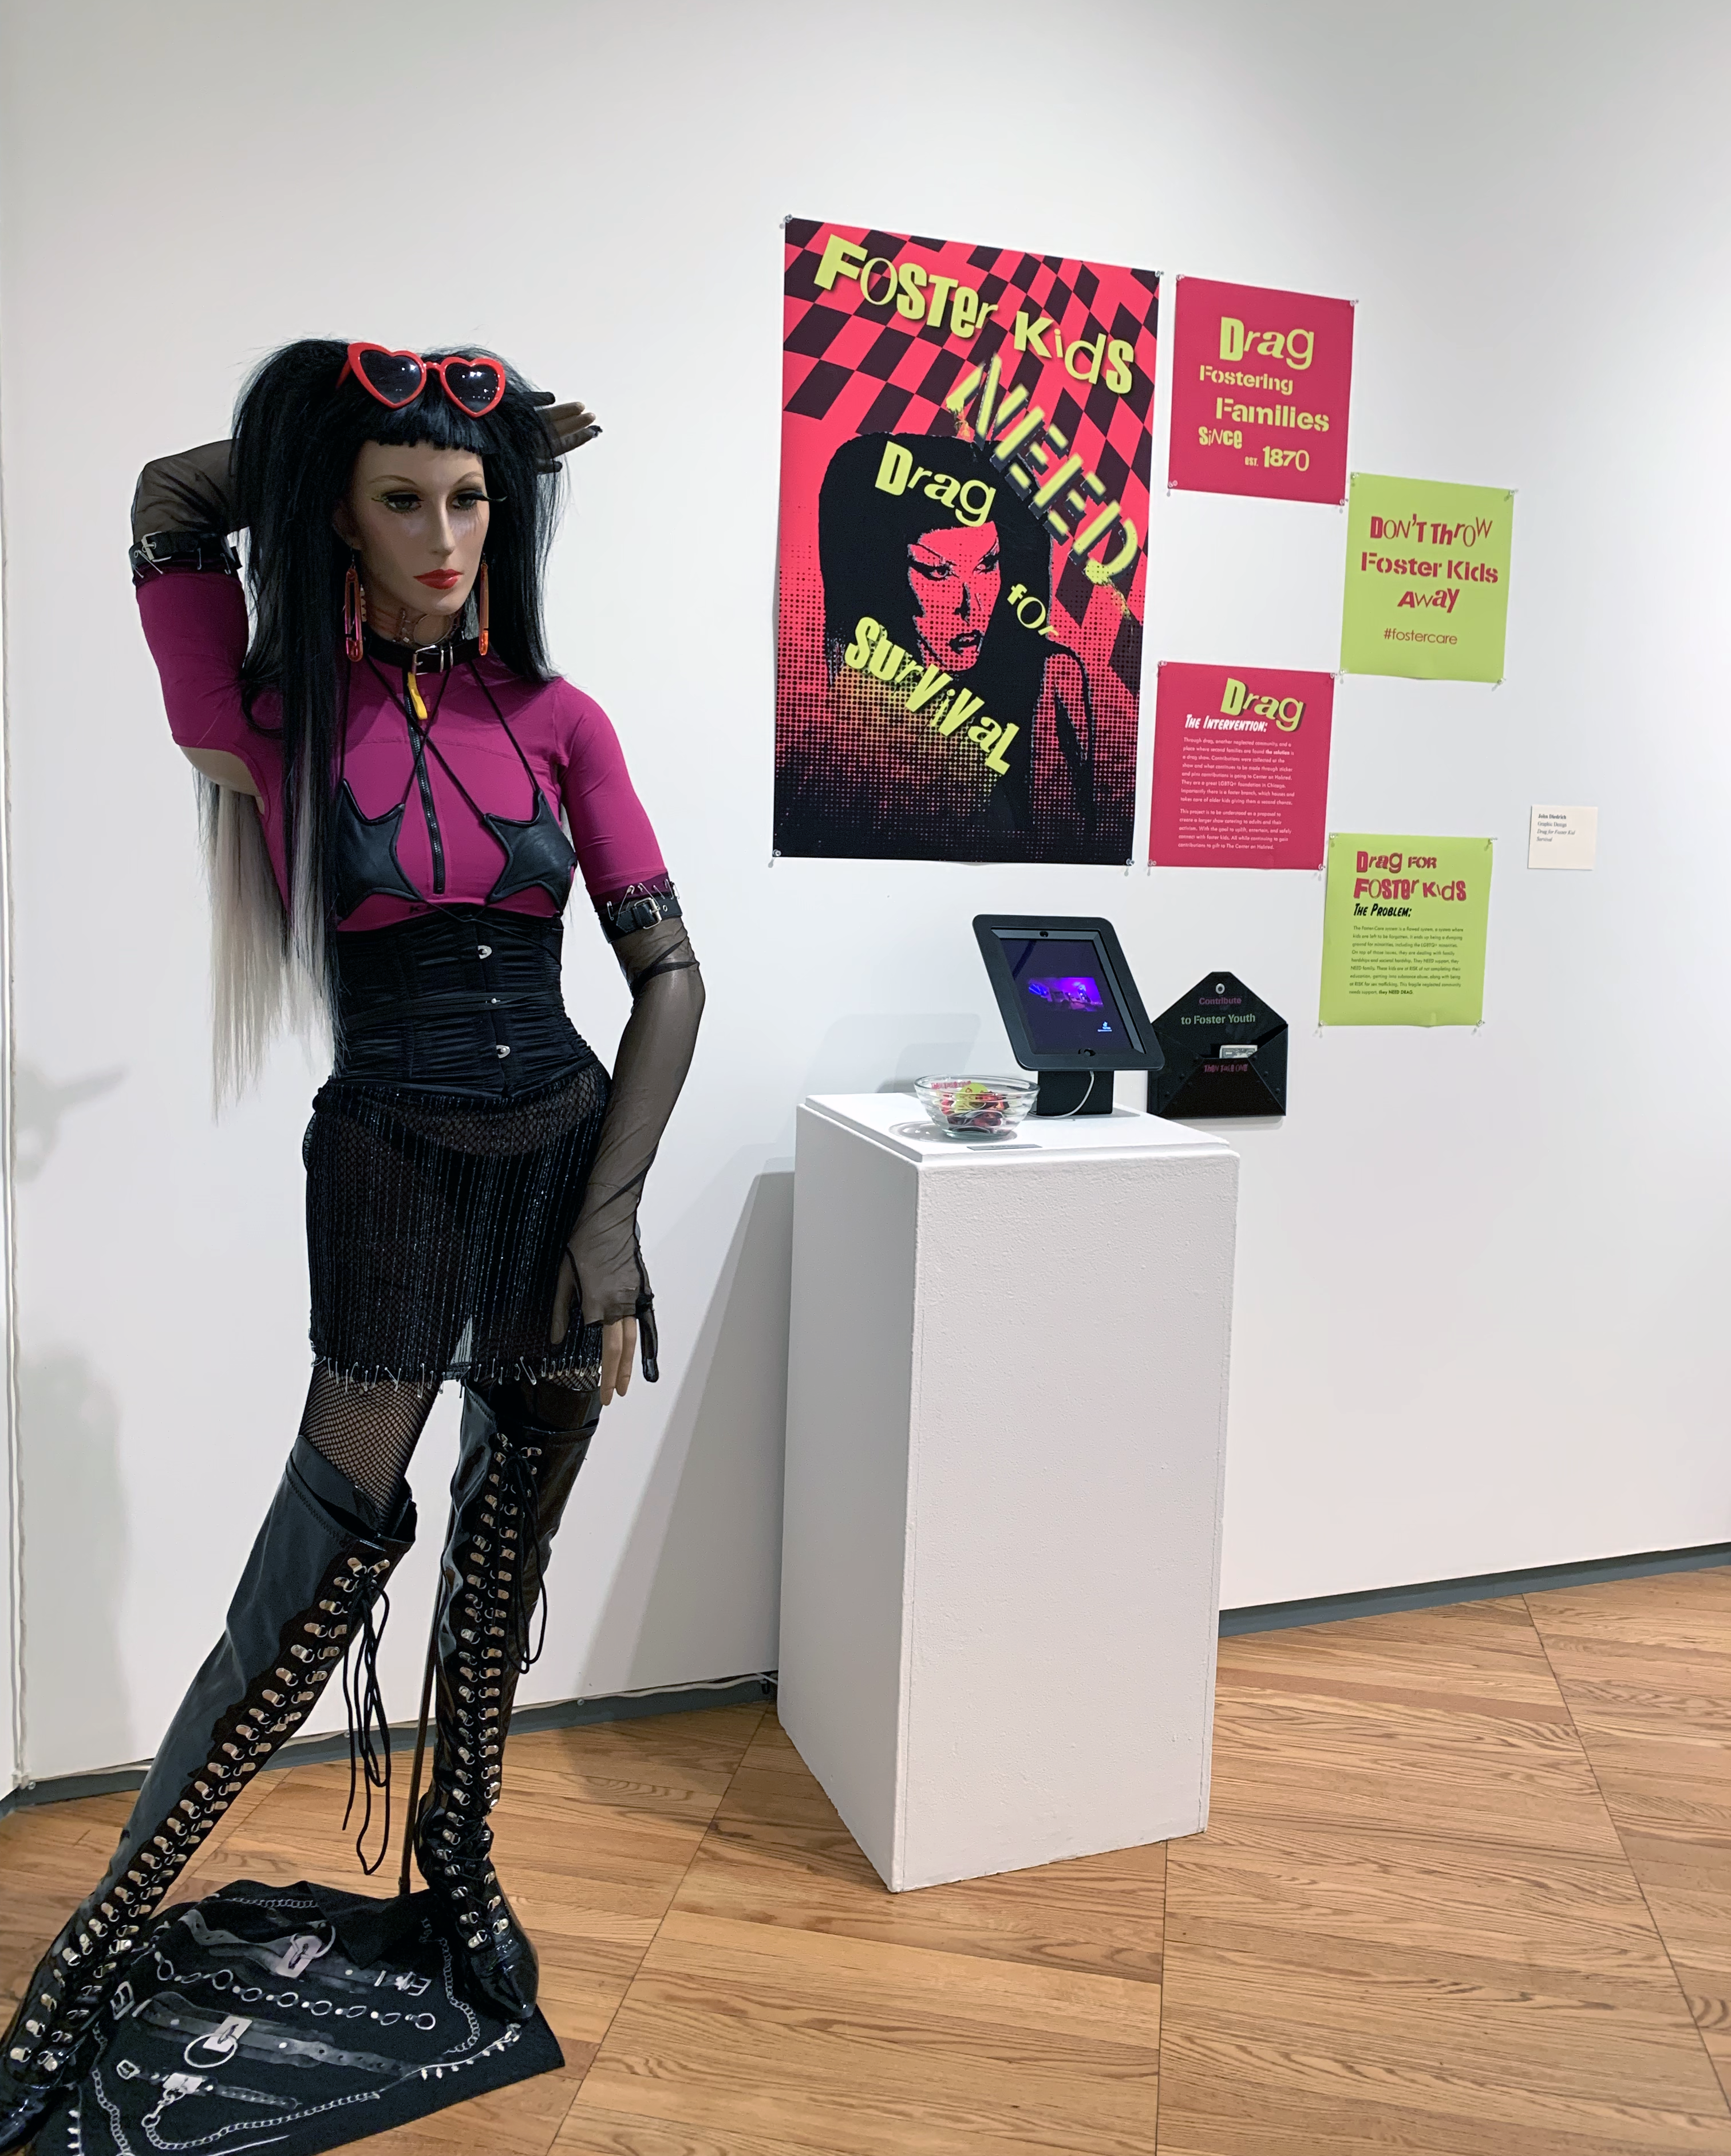 Maniken in drag in front of posters and digital displays for Drag for Foster Kids project.